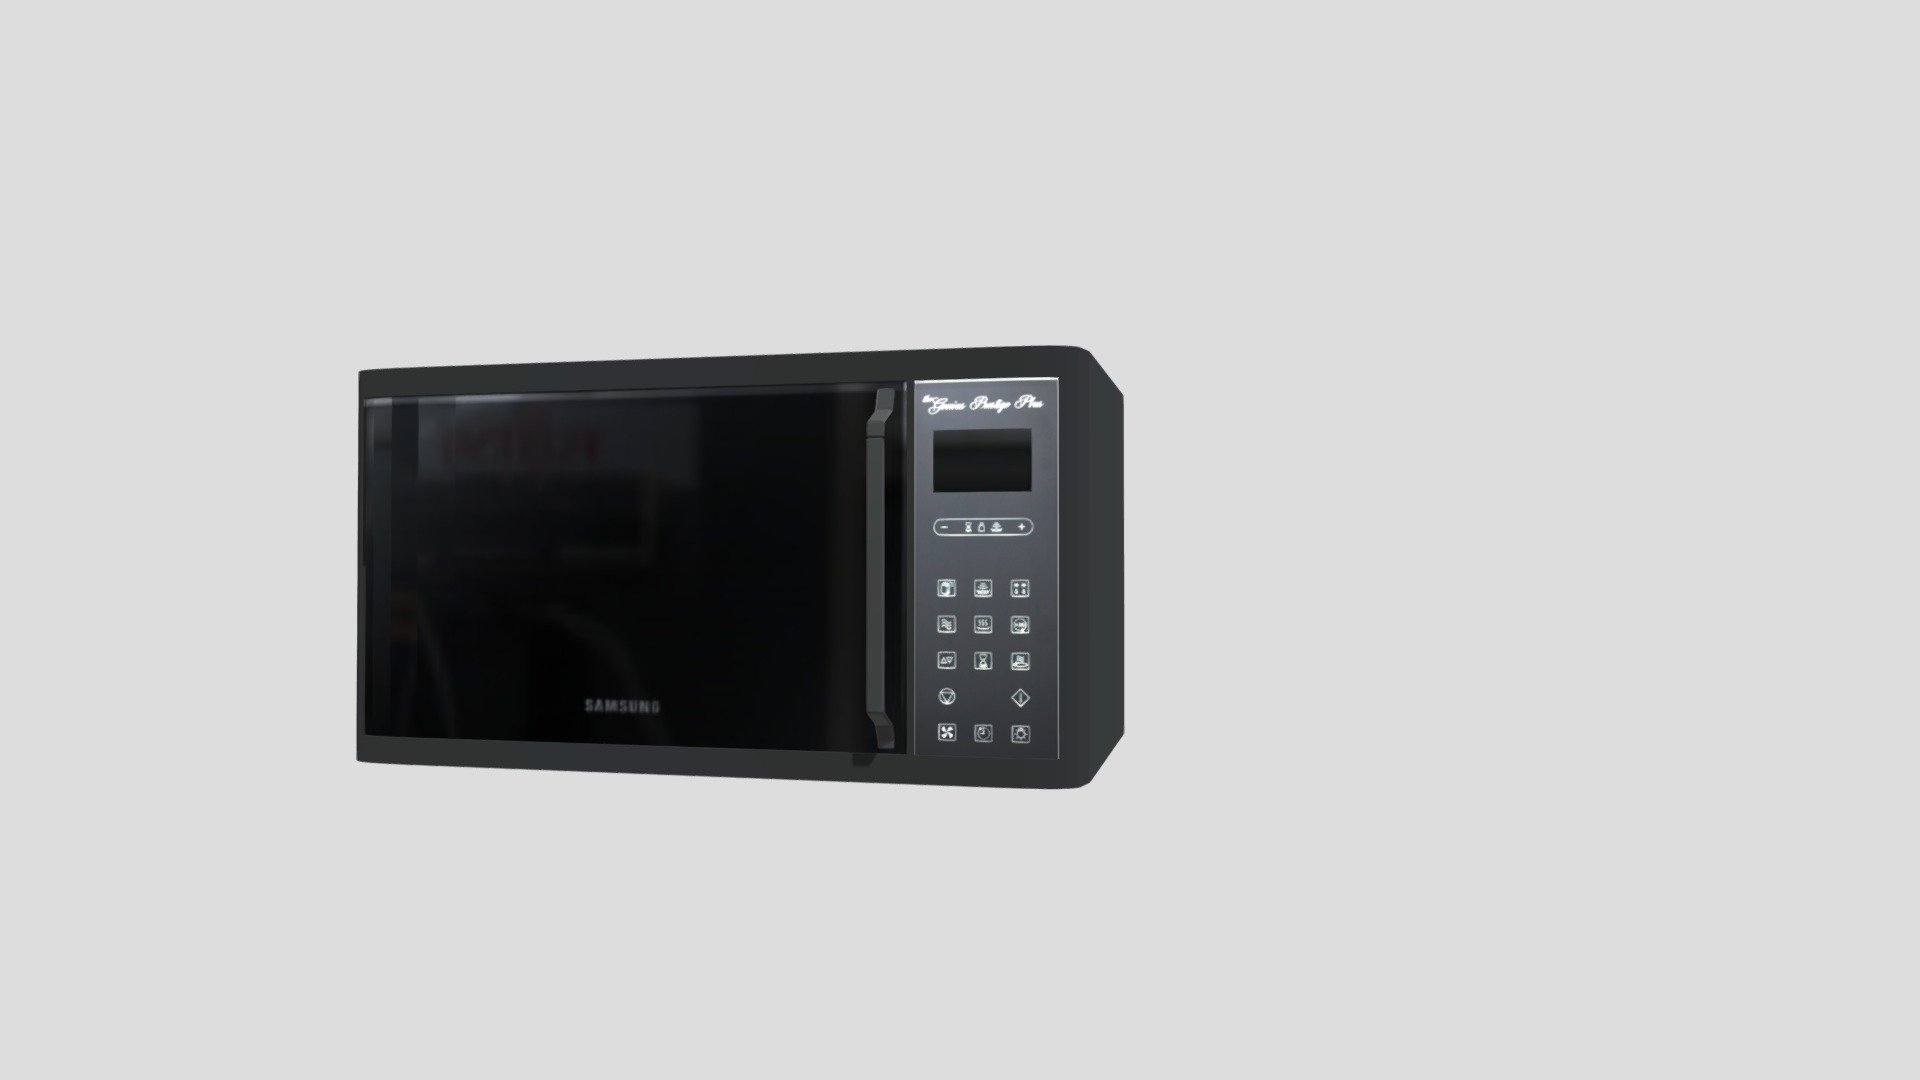 Hello,this is my first 3d model upload on this site.It is the model of a simple microwave oven with very simple geometry 3d model